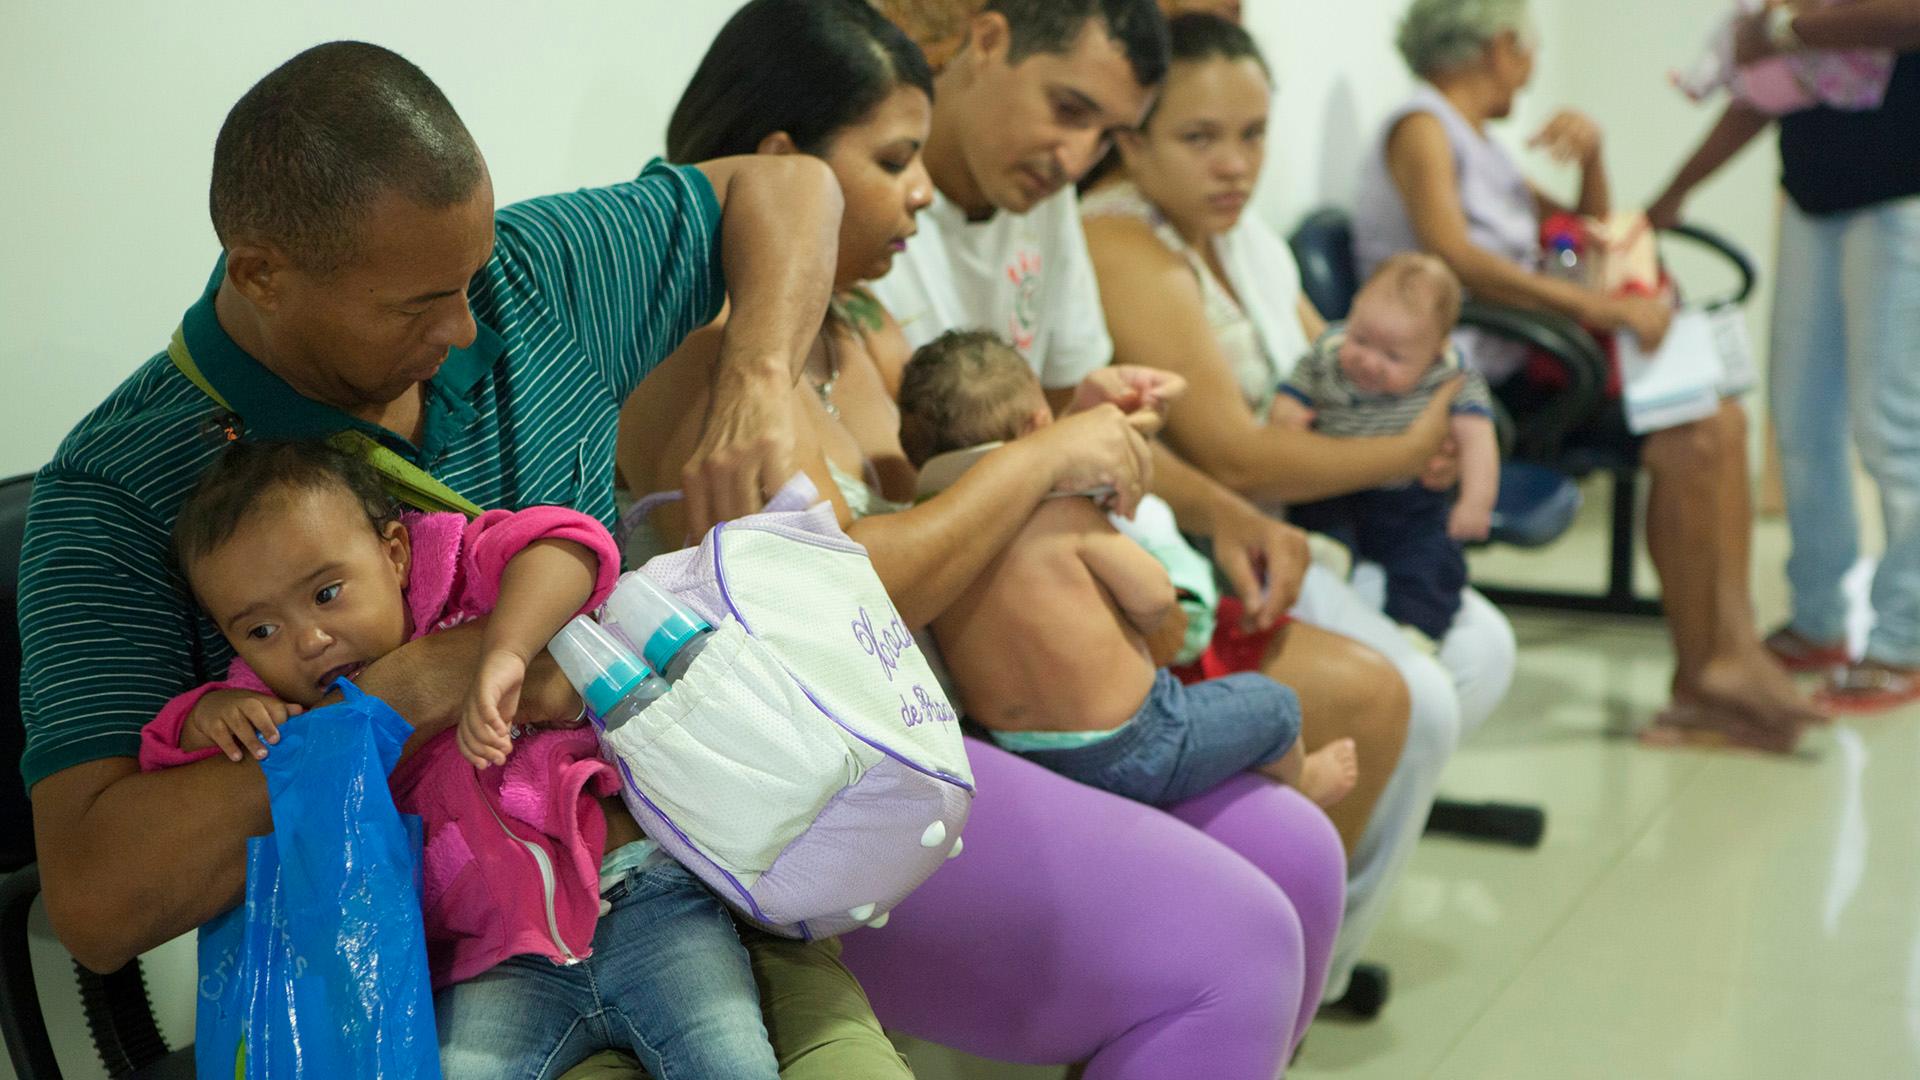 Parents wait with their children at the public hospital in Ipojuca, Brazil.